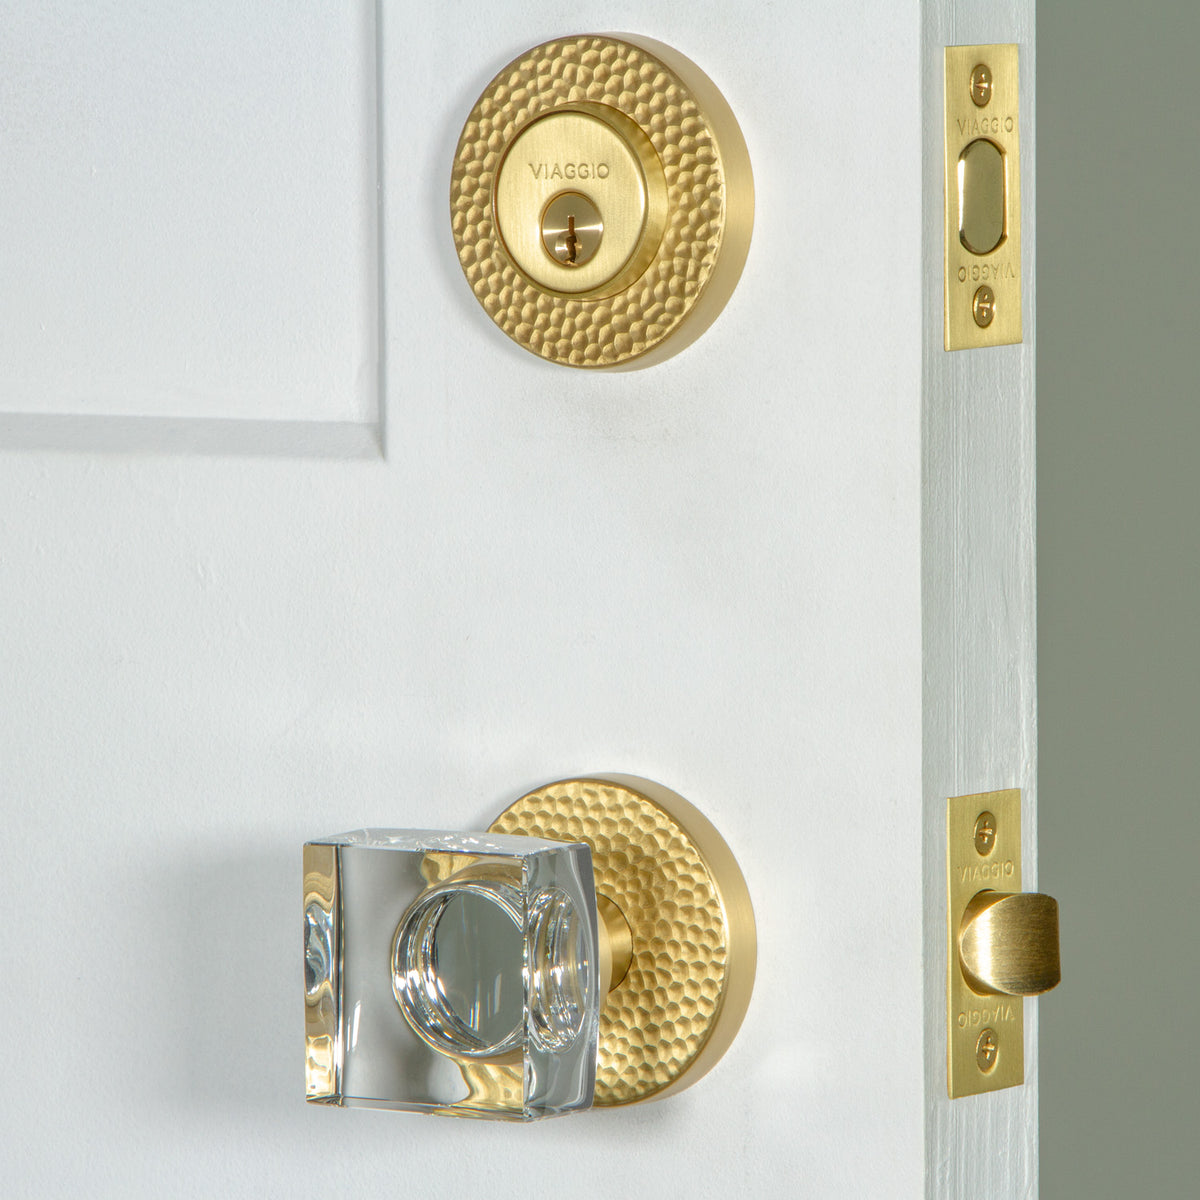 Circolo Hammered Rosette Entry Set with Quadrato Crystal Knob in Satin Brass